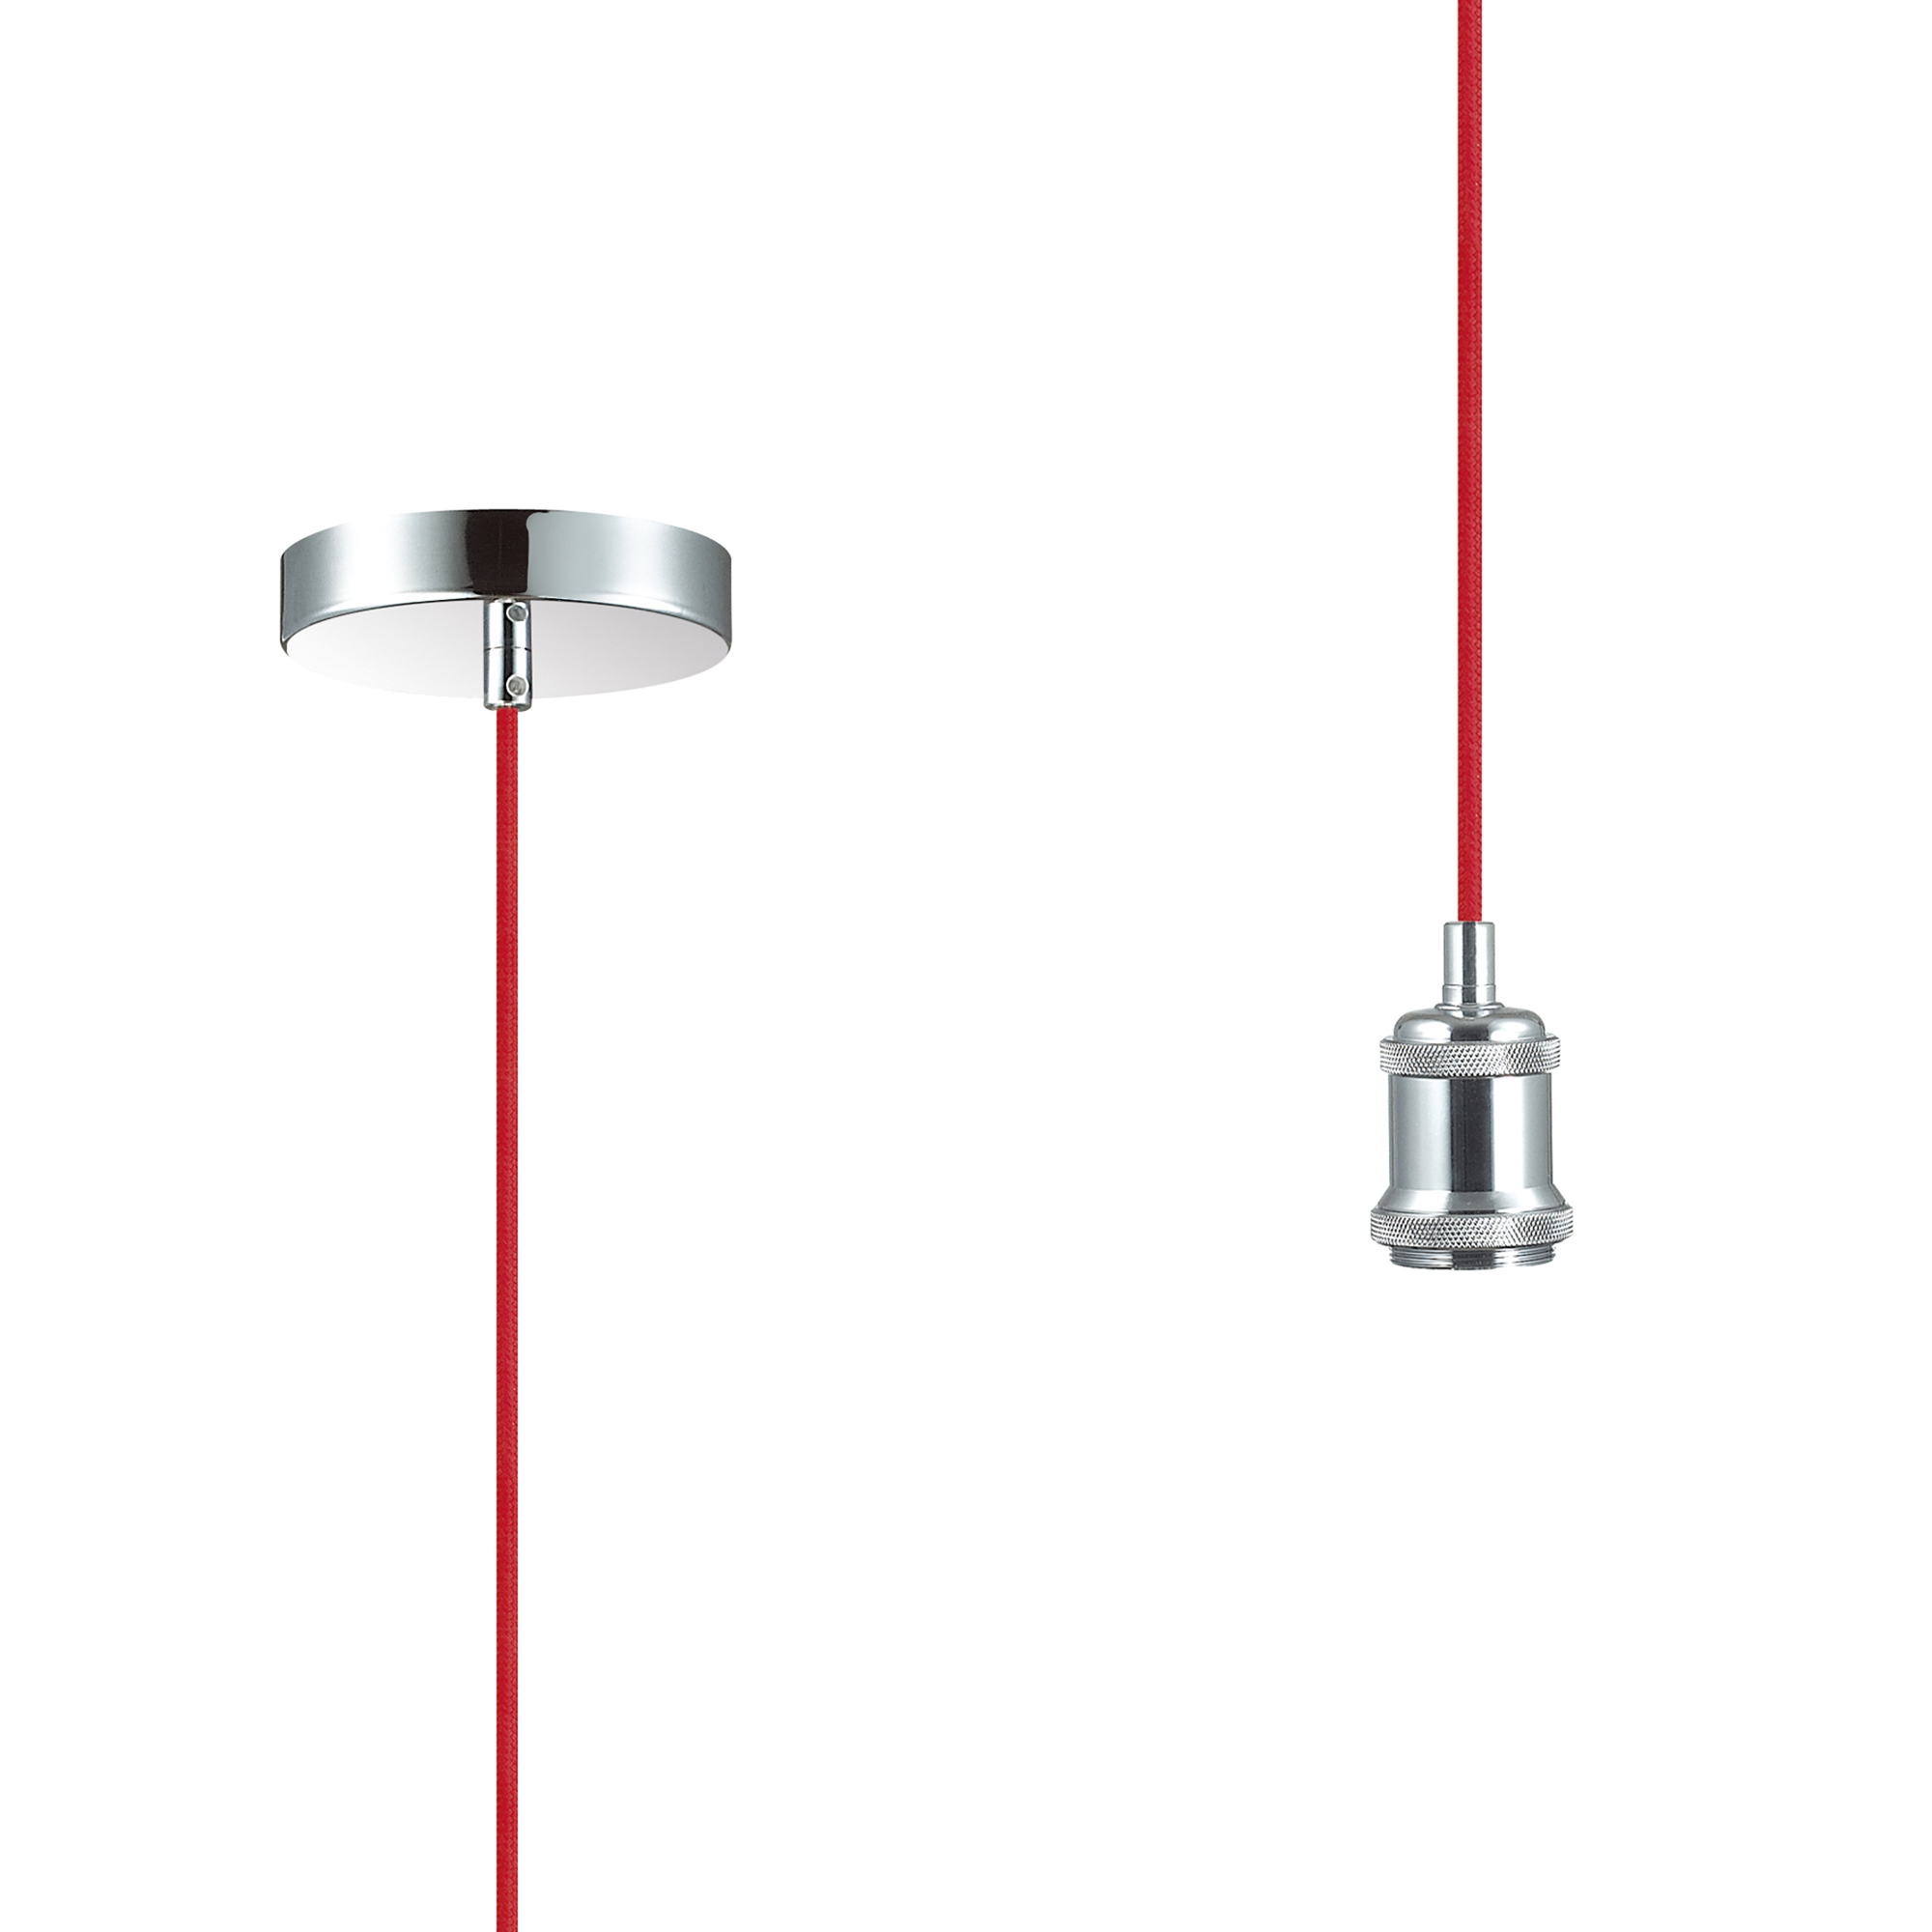 D0174  Dreifa Suspension Kit 1 Light Polished Chrome; Red Braided Cable